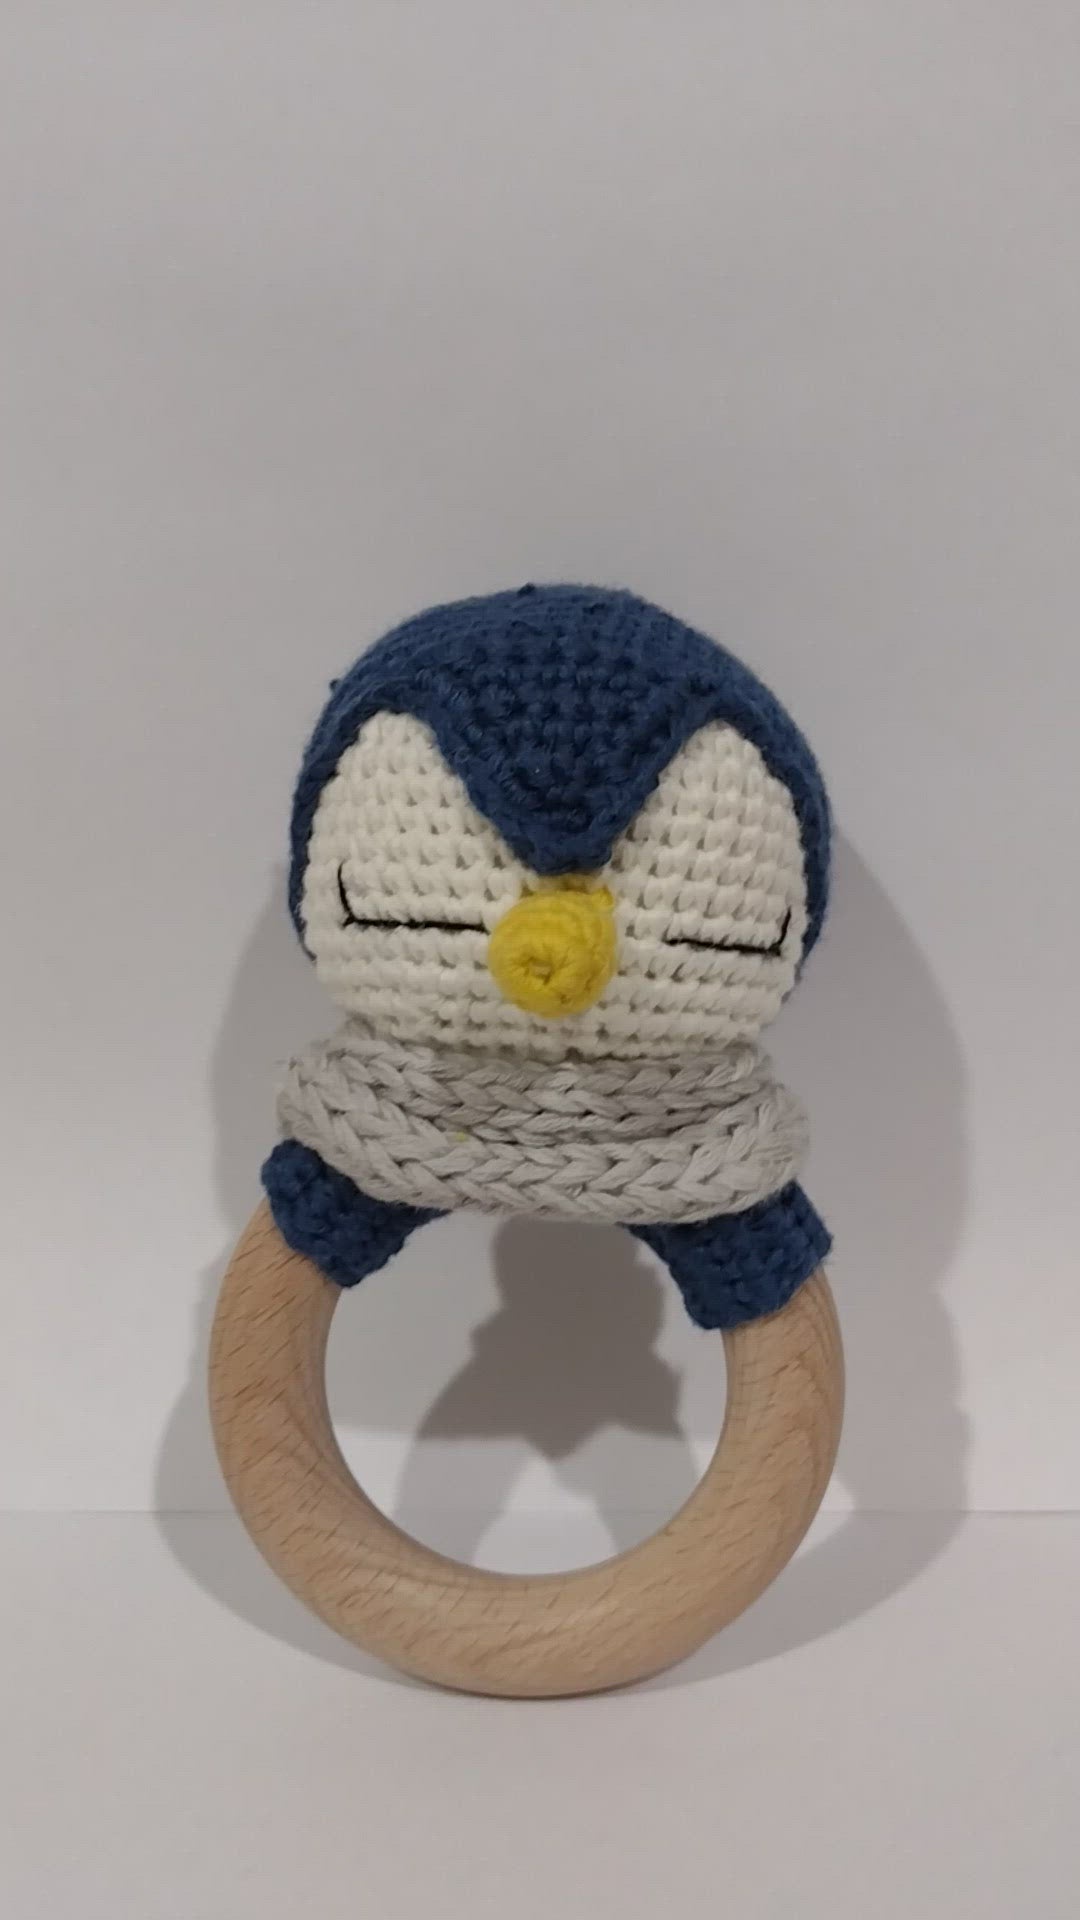 Handmade Penguin Teether / Rattle (Name or Name + DOB) Personalised